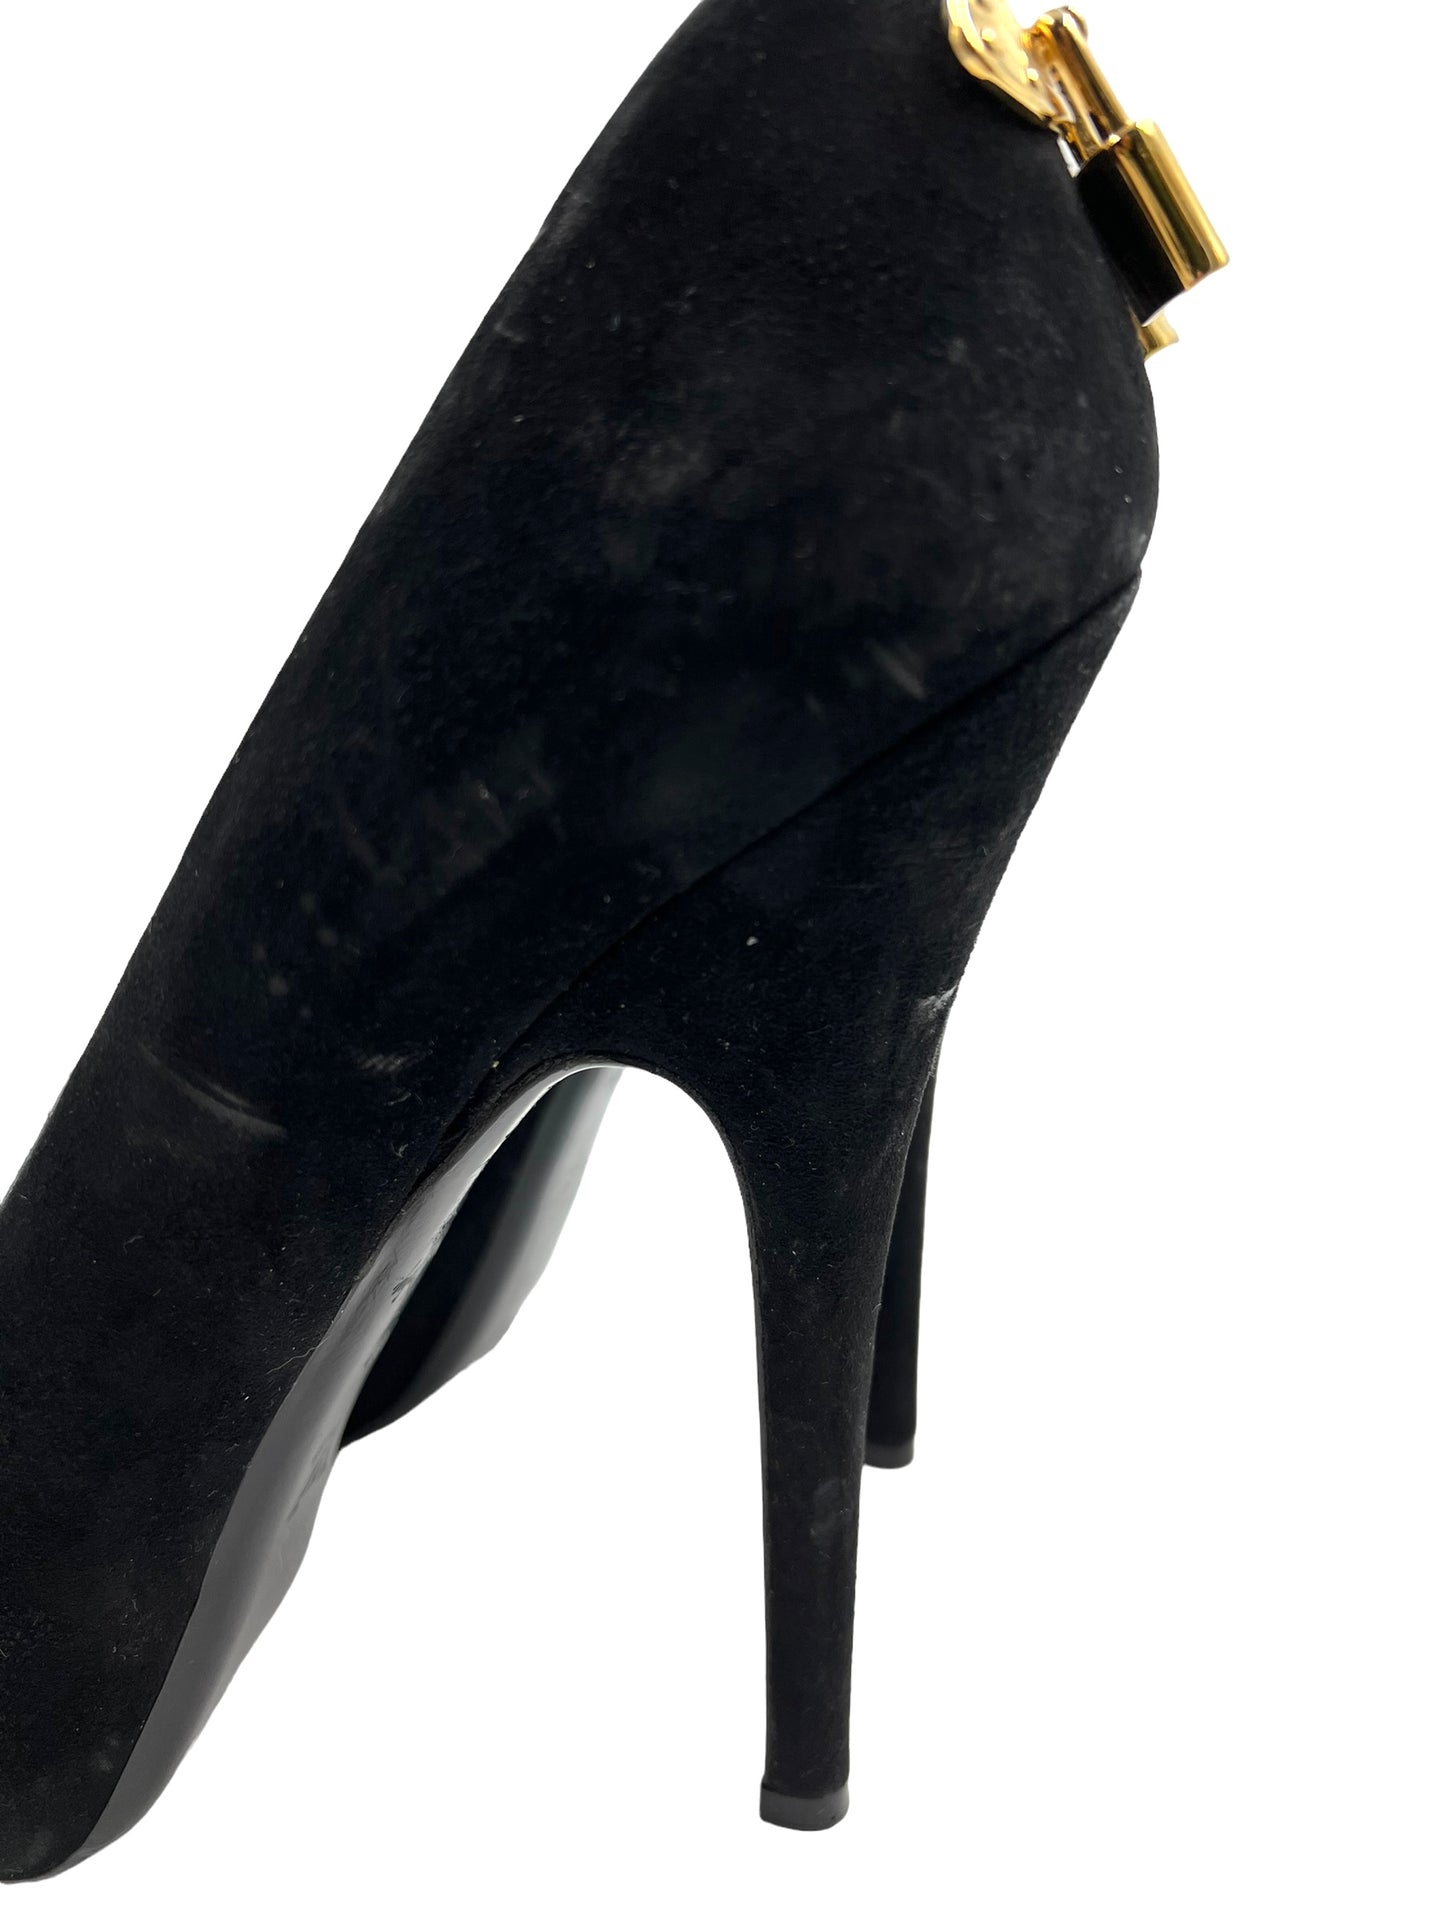 Louis Vuitton Black Suede 'Oh Really!' Size 39.5 Lock Heels